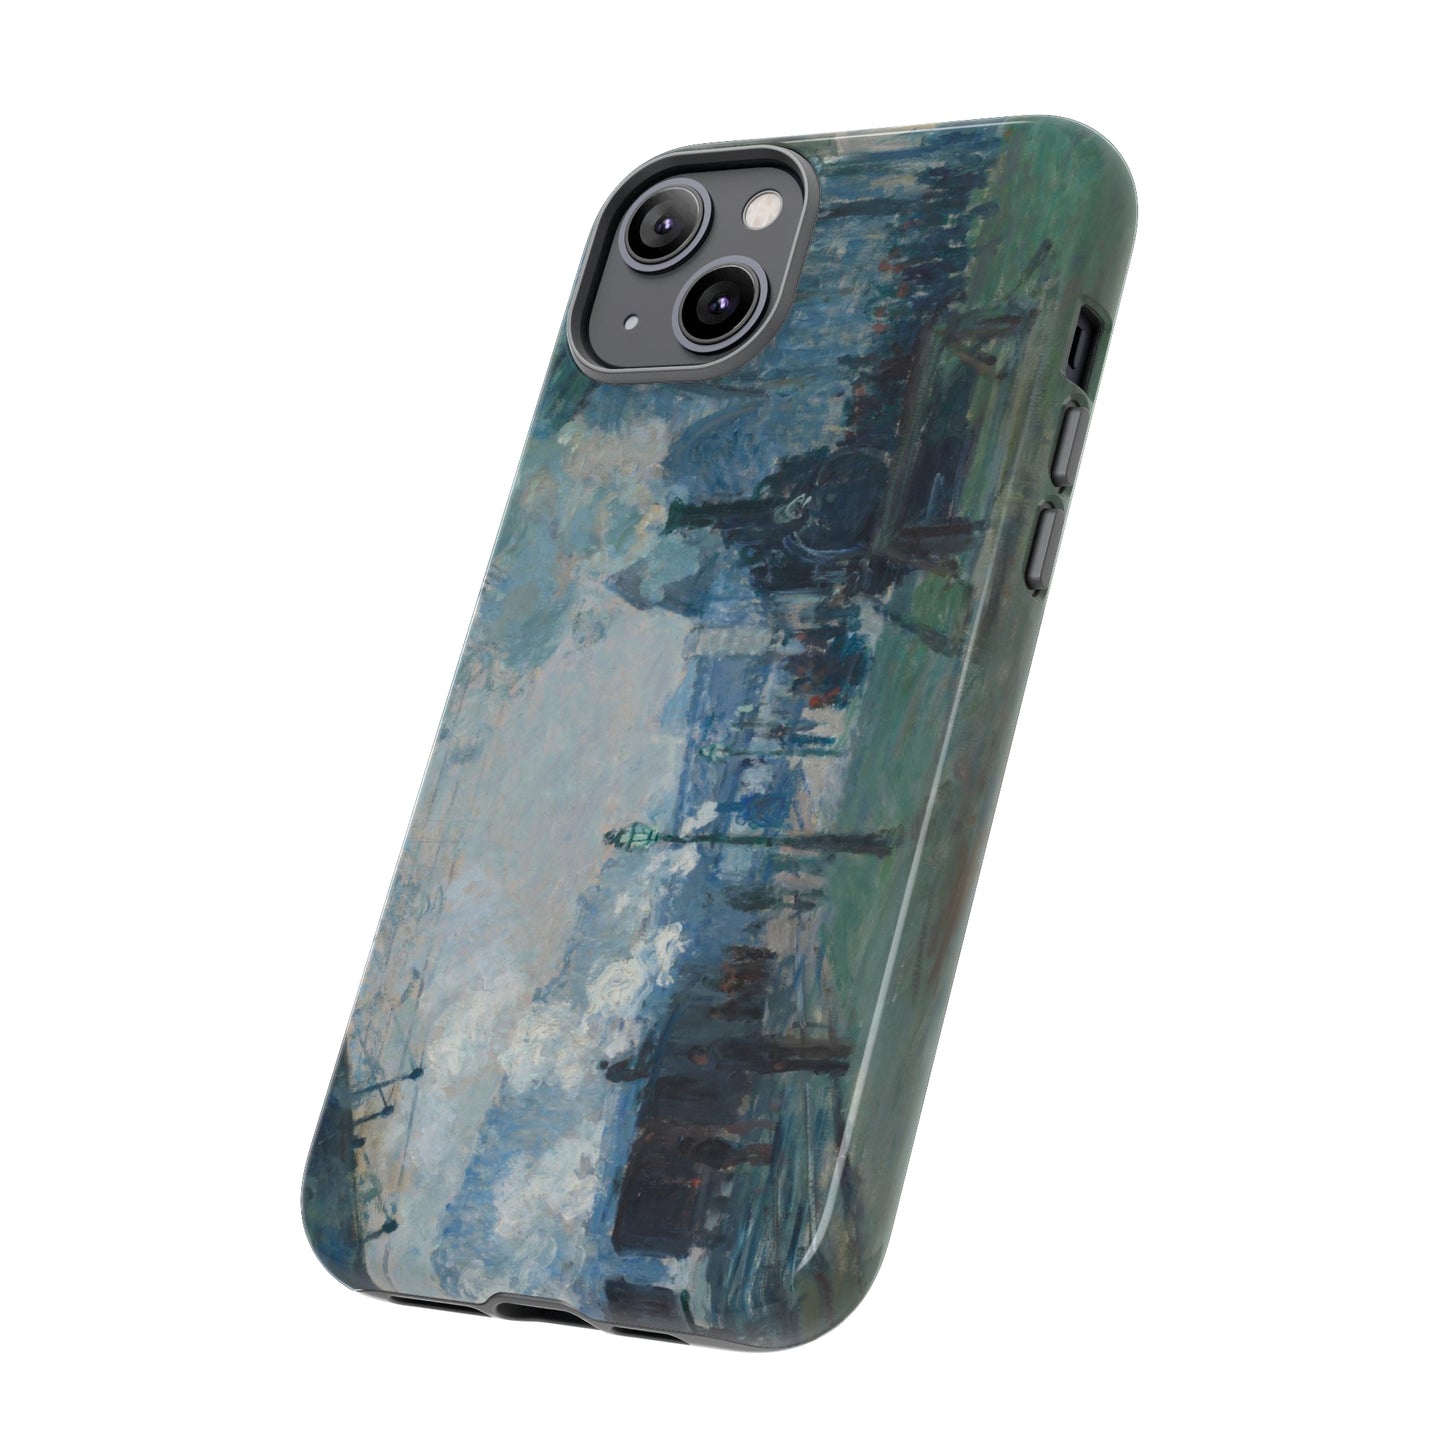 Arrival of the Normandy Train by Claude Monet - Cell Phone Case